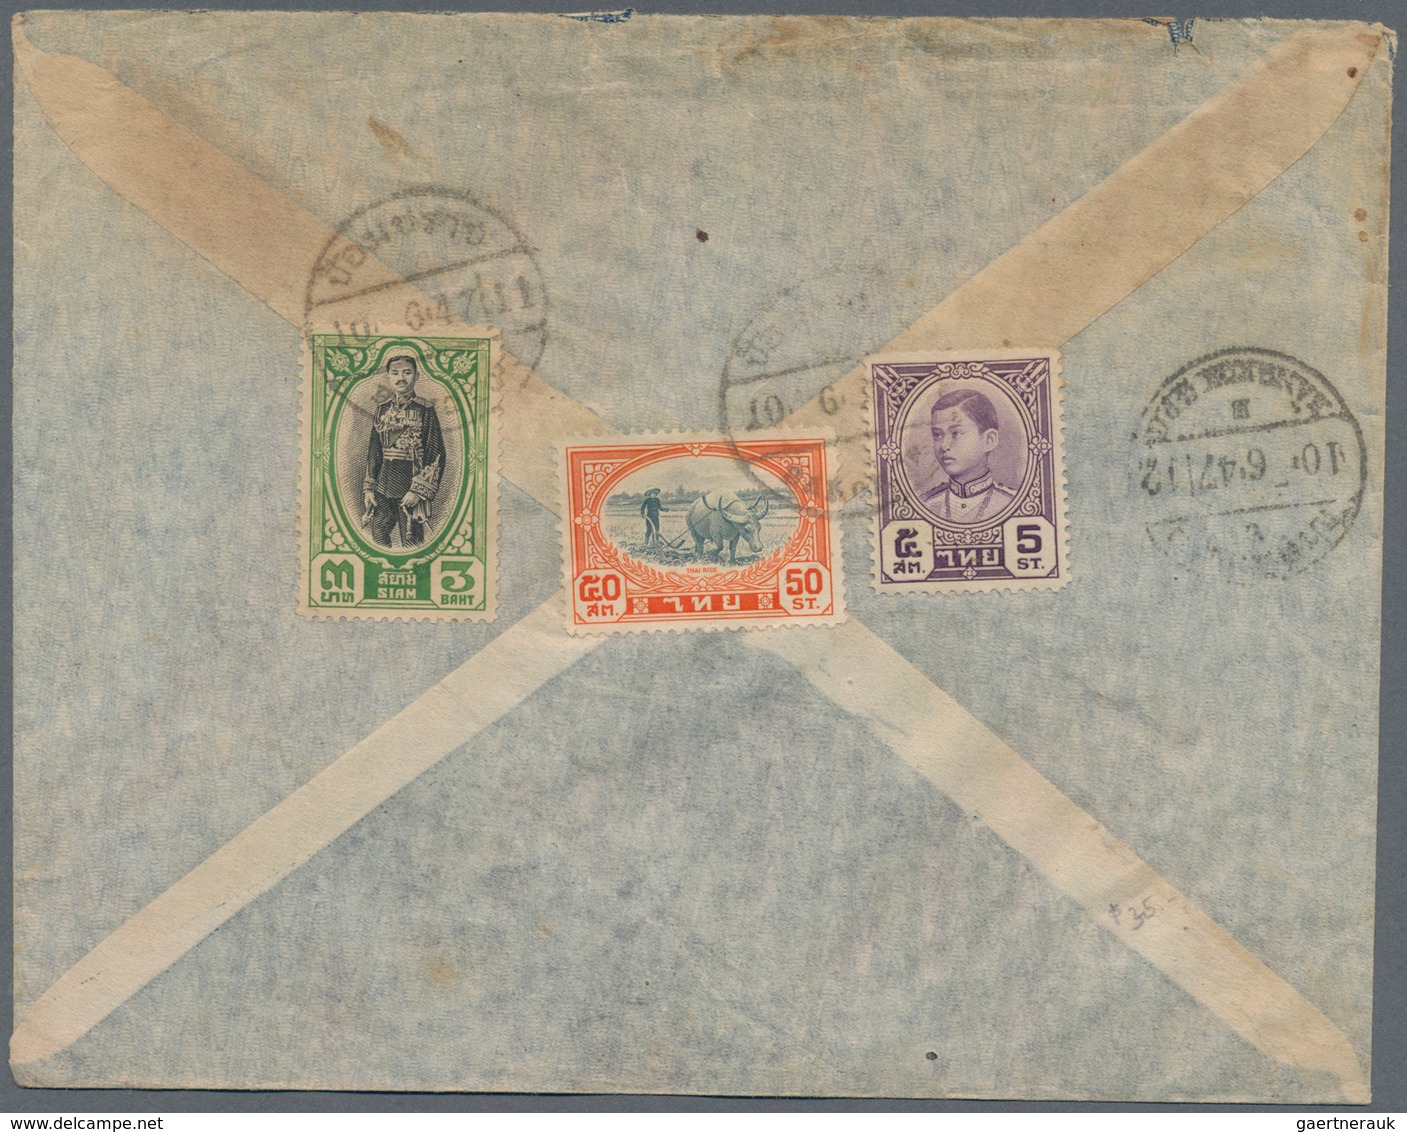 Thailand: 1947, Two Airmail Covers To The U.S.A., Both With "A.V.2" Handstamp And Franked By 1928 'R - Thailand